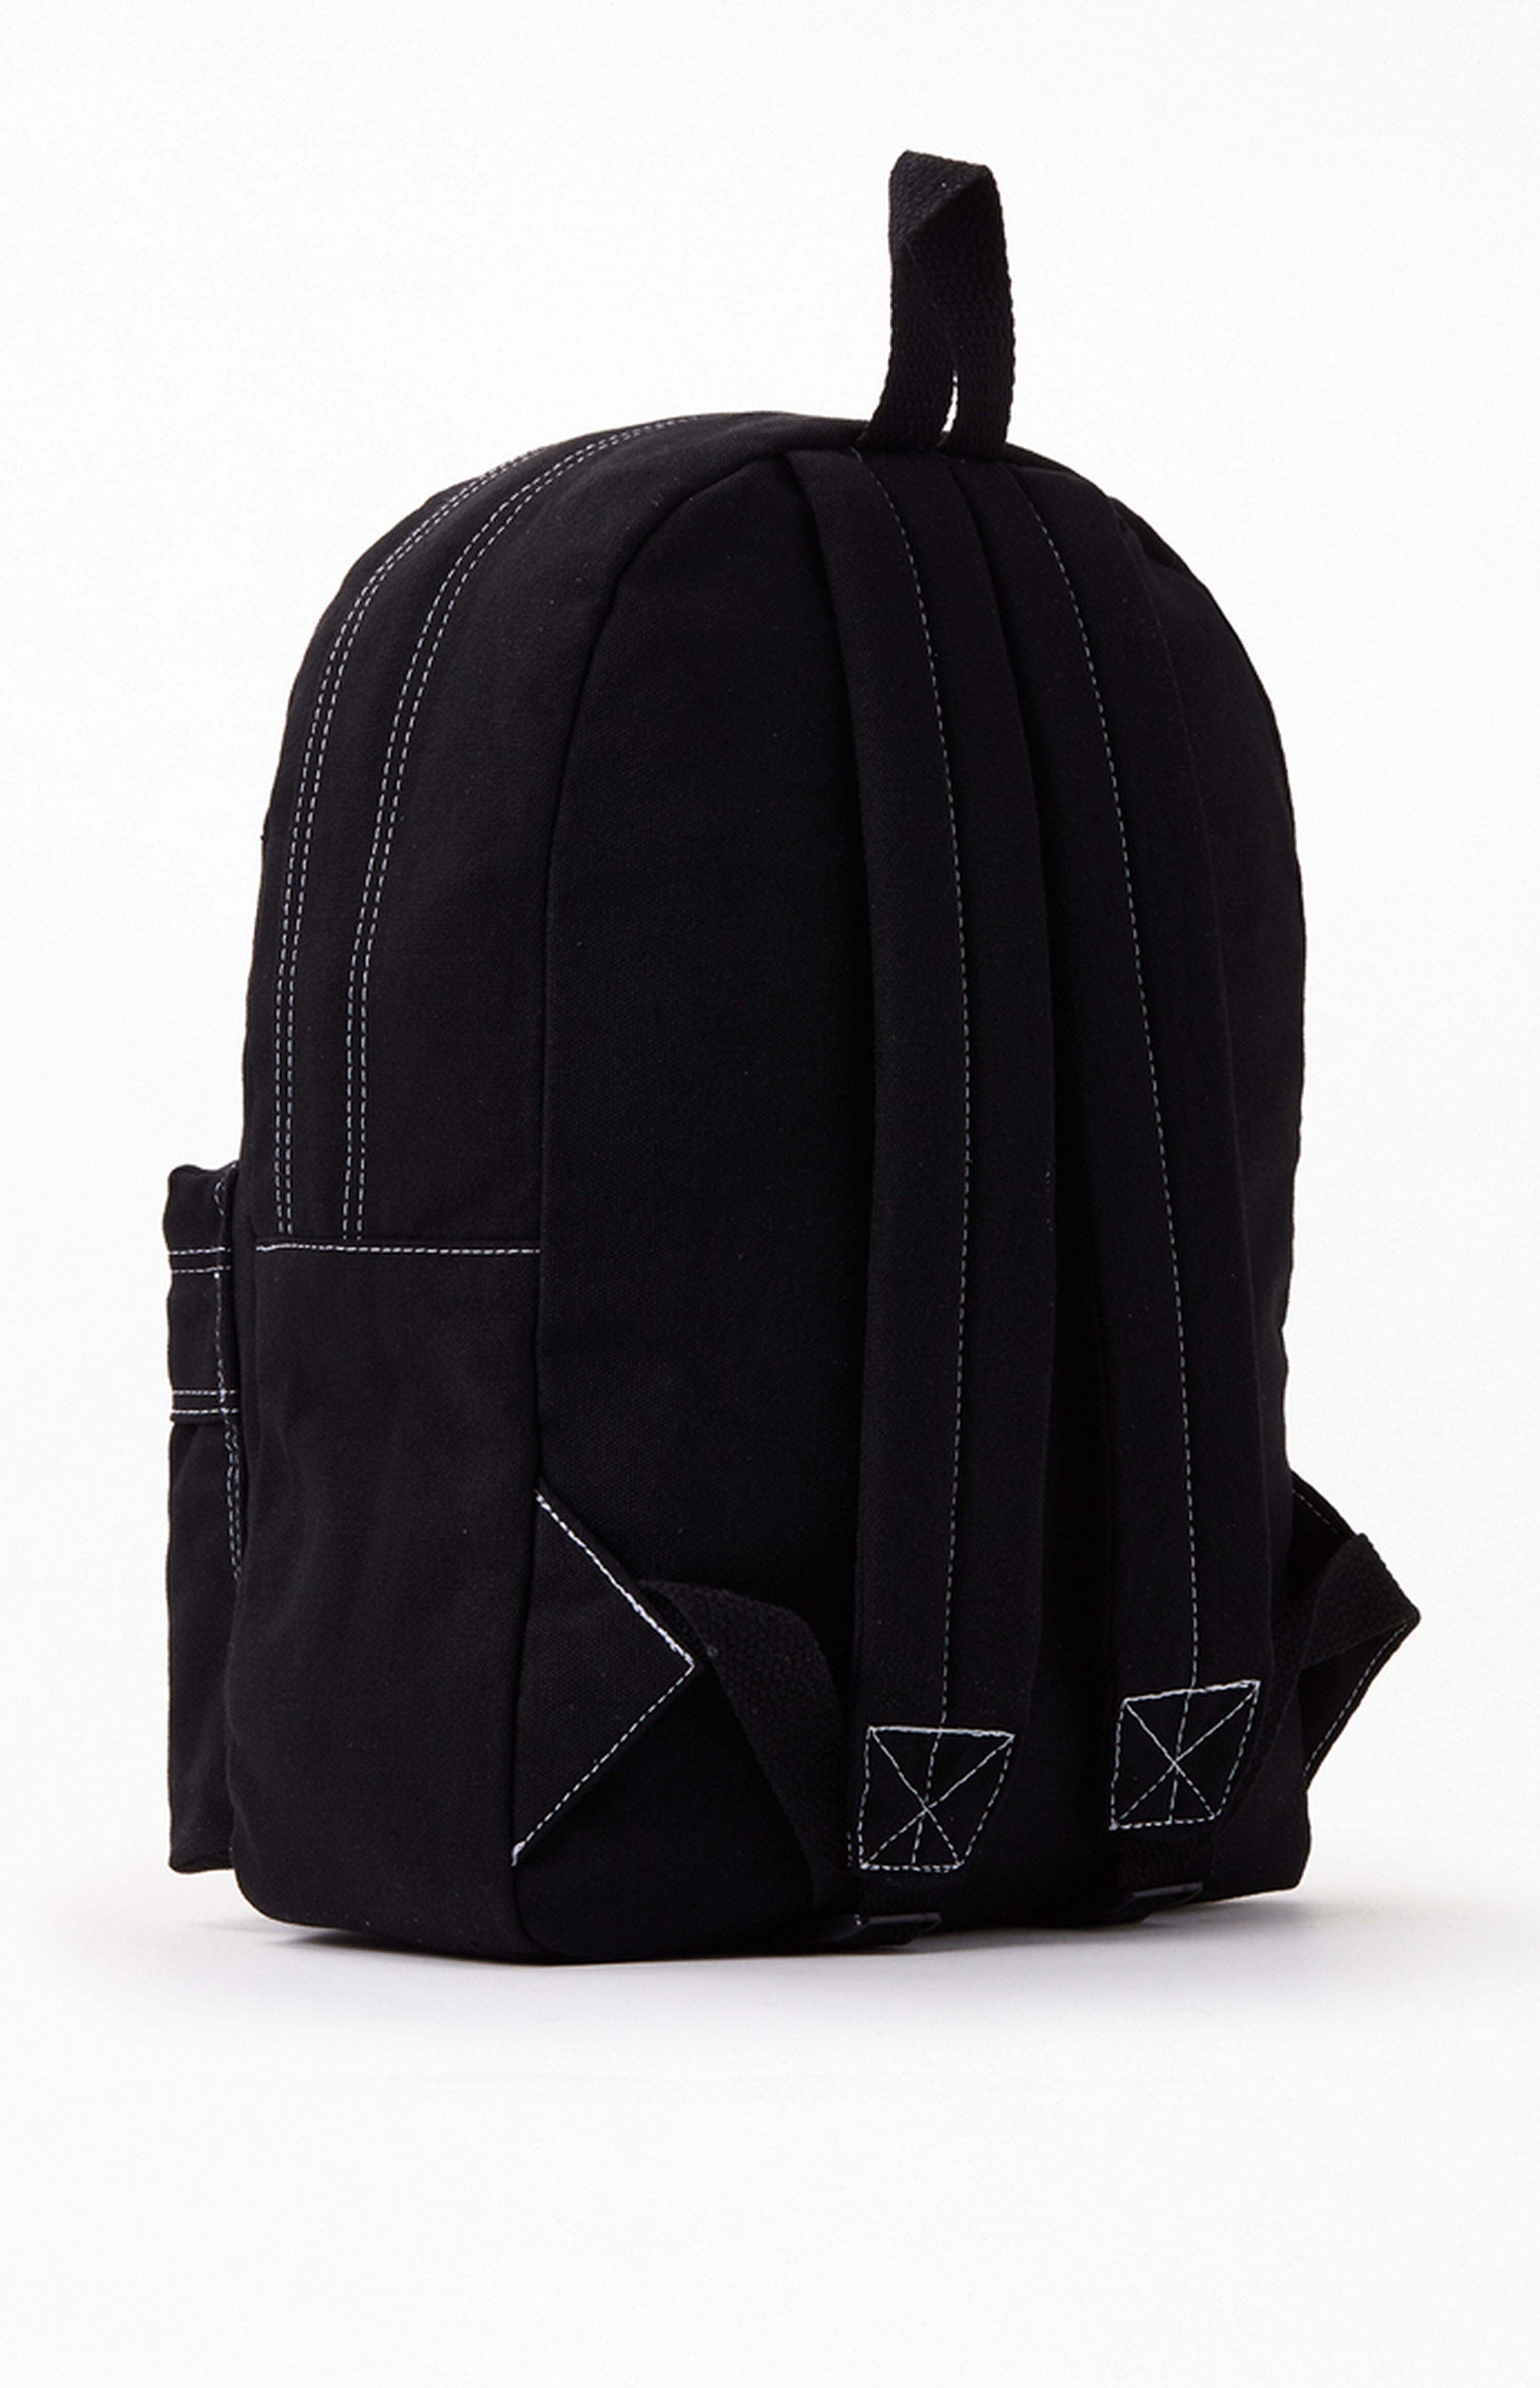 PacSun Stitched Backpack | PacSun